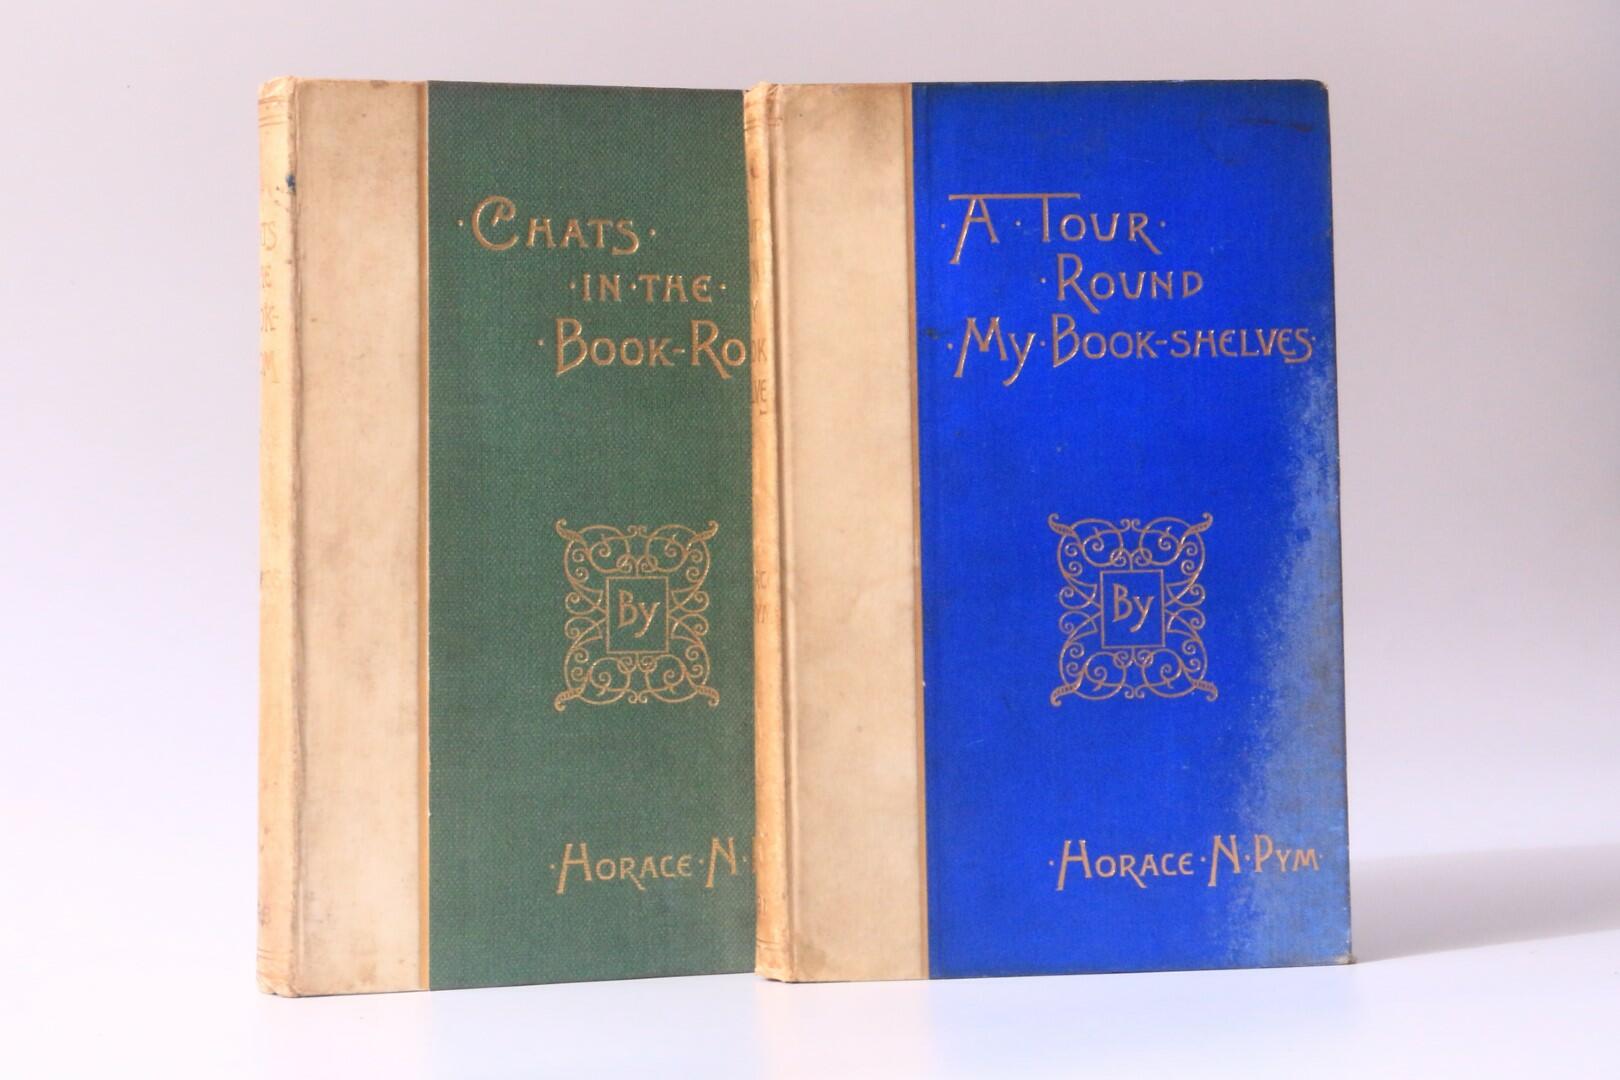 Horace N. Pym - A Tour Round My Book-Shelves w/ Chats in the Book-Room - Privately Printed, 1891-1895, Signed Limited Edition.